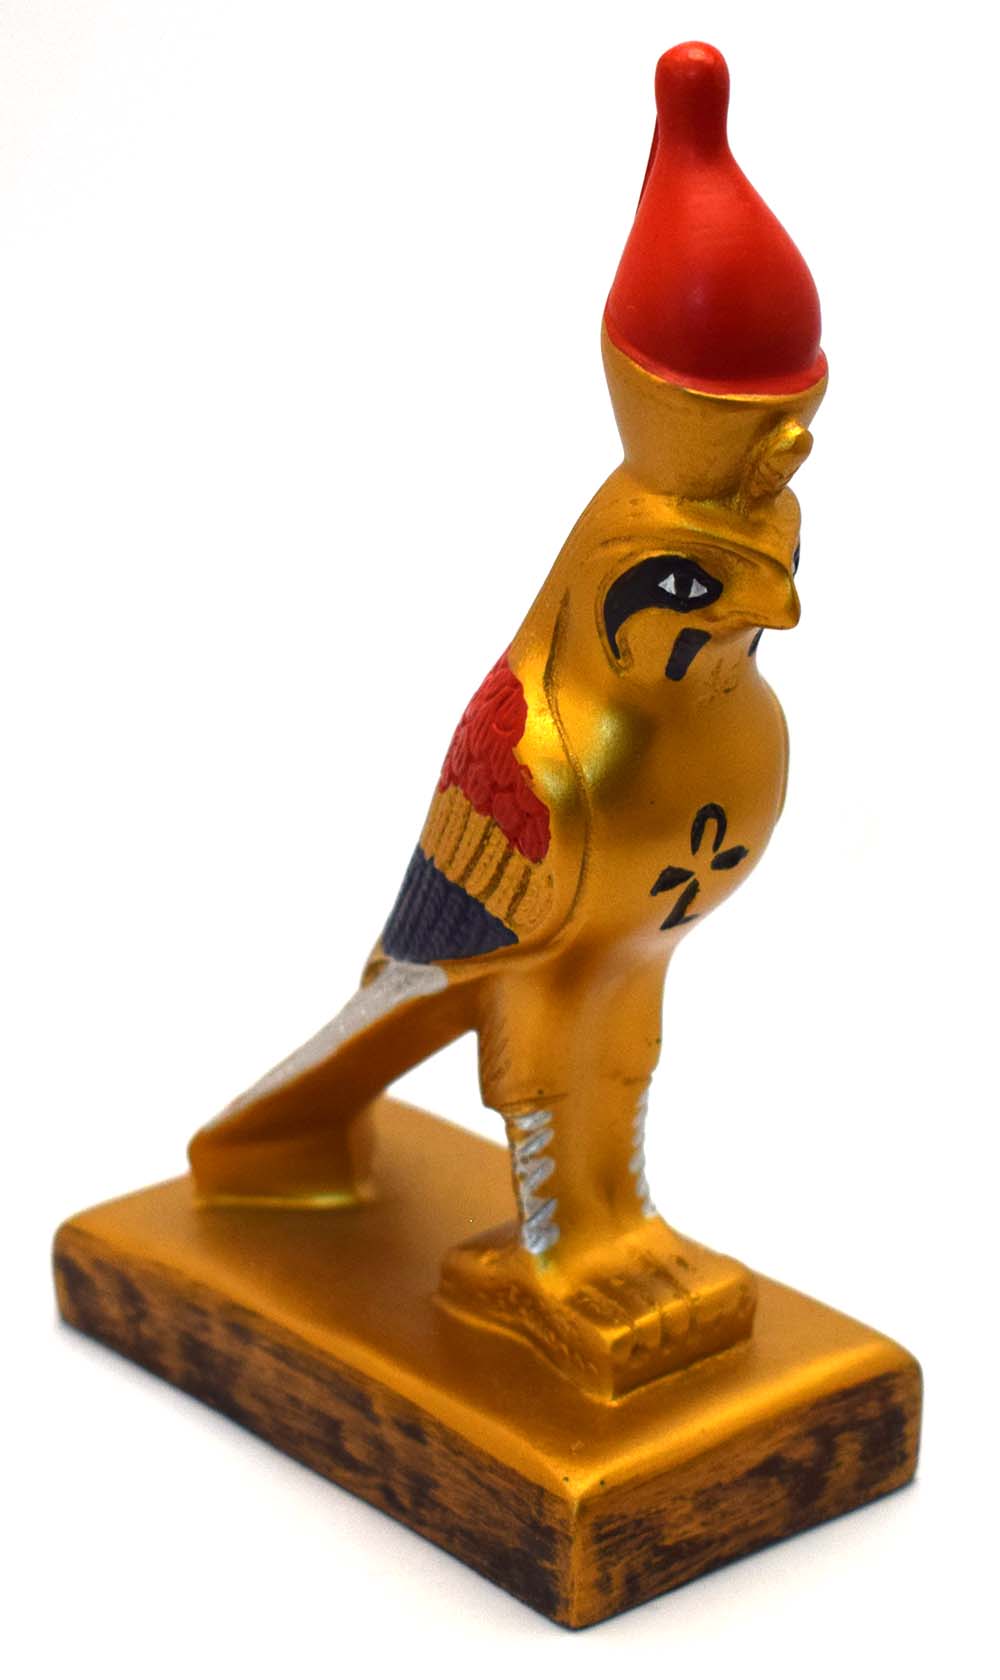 immatgar pharaonic Egyptian Horus Statue Egyptian souvenirs gifts - Inspired Gift from Egypt ( Multi color - 14 Cm )